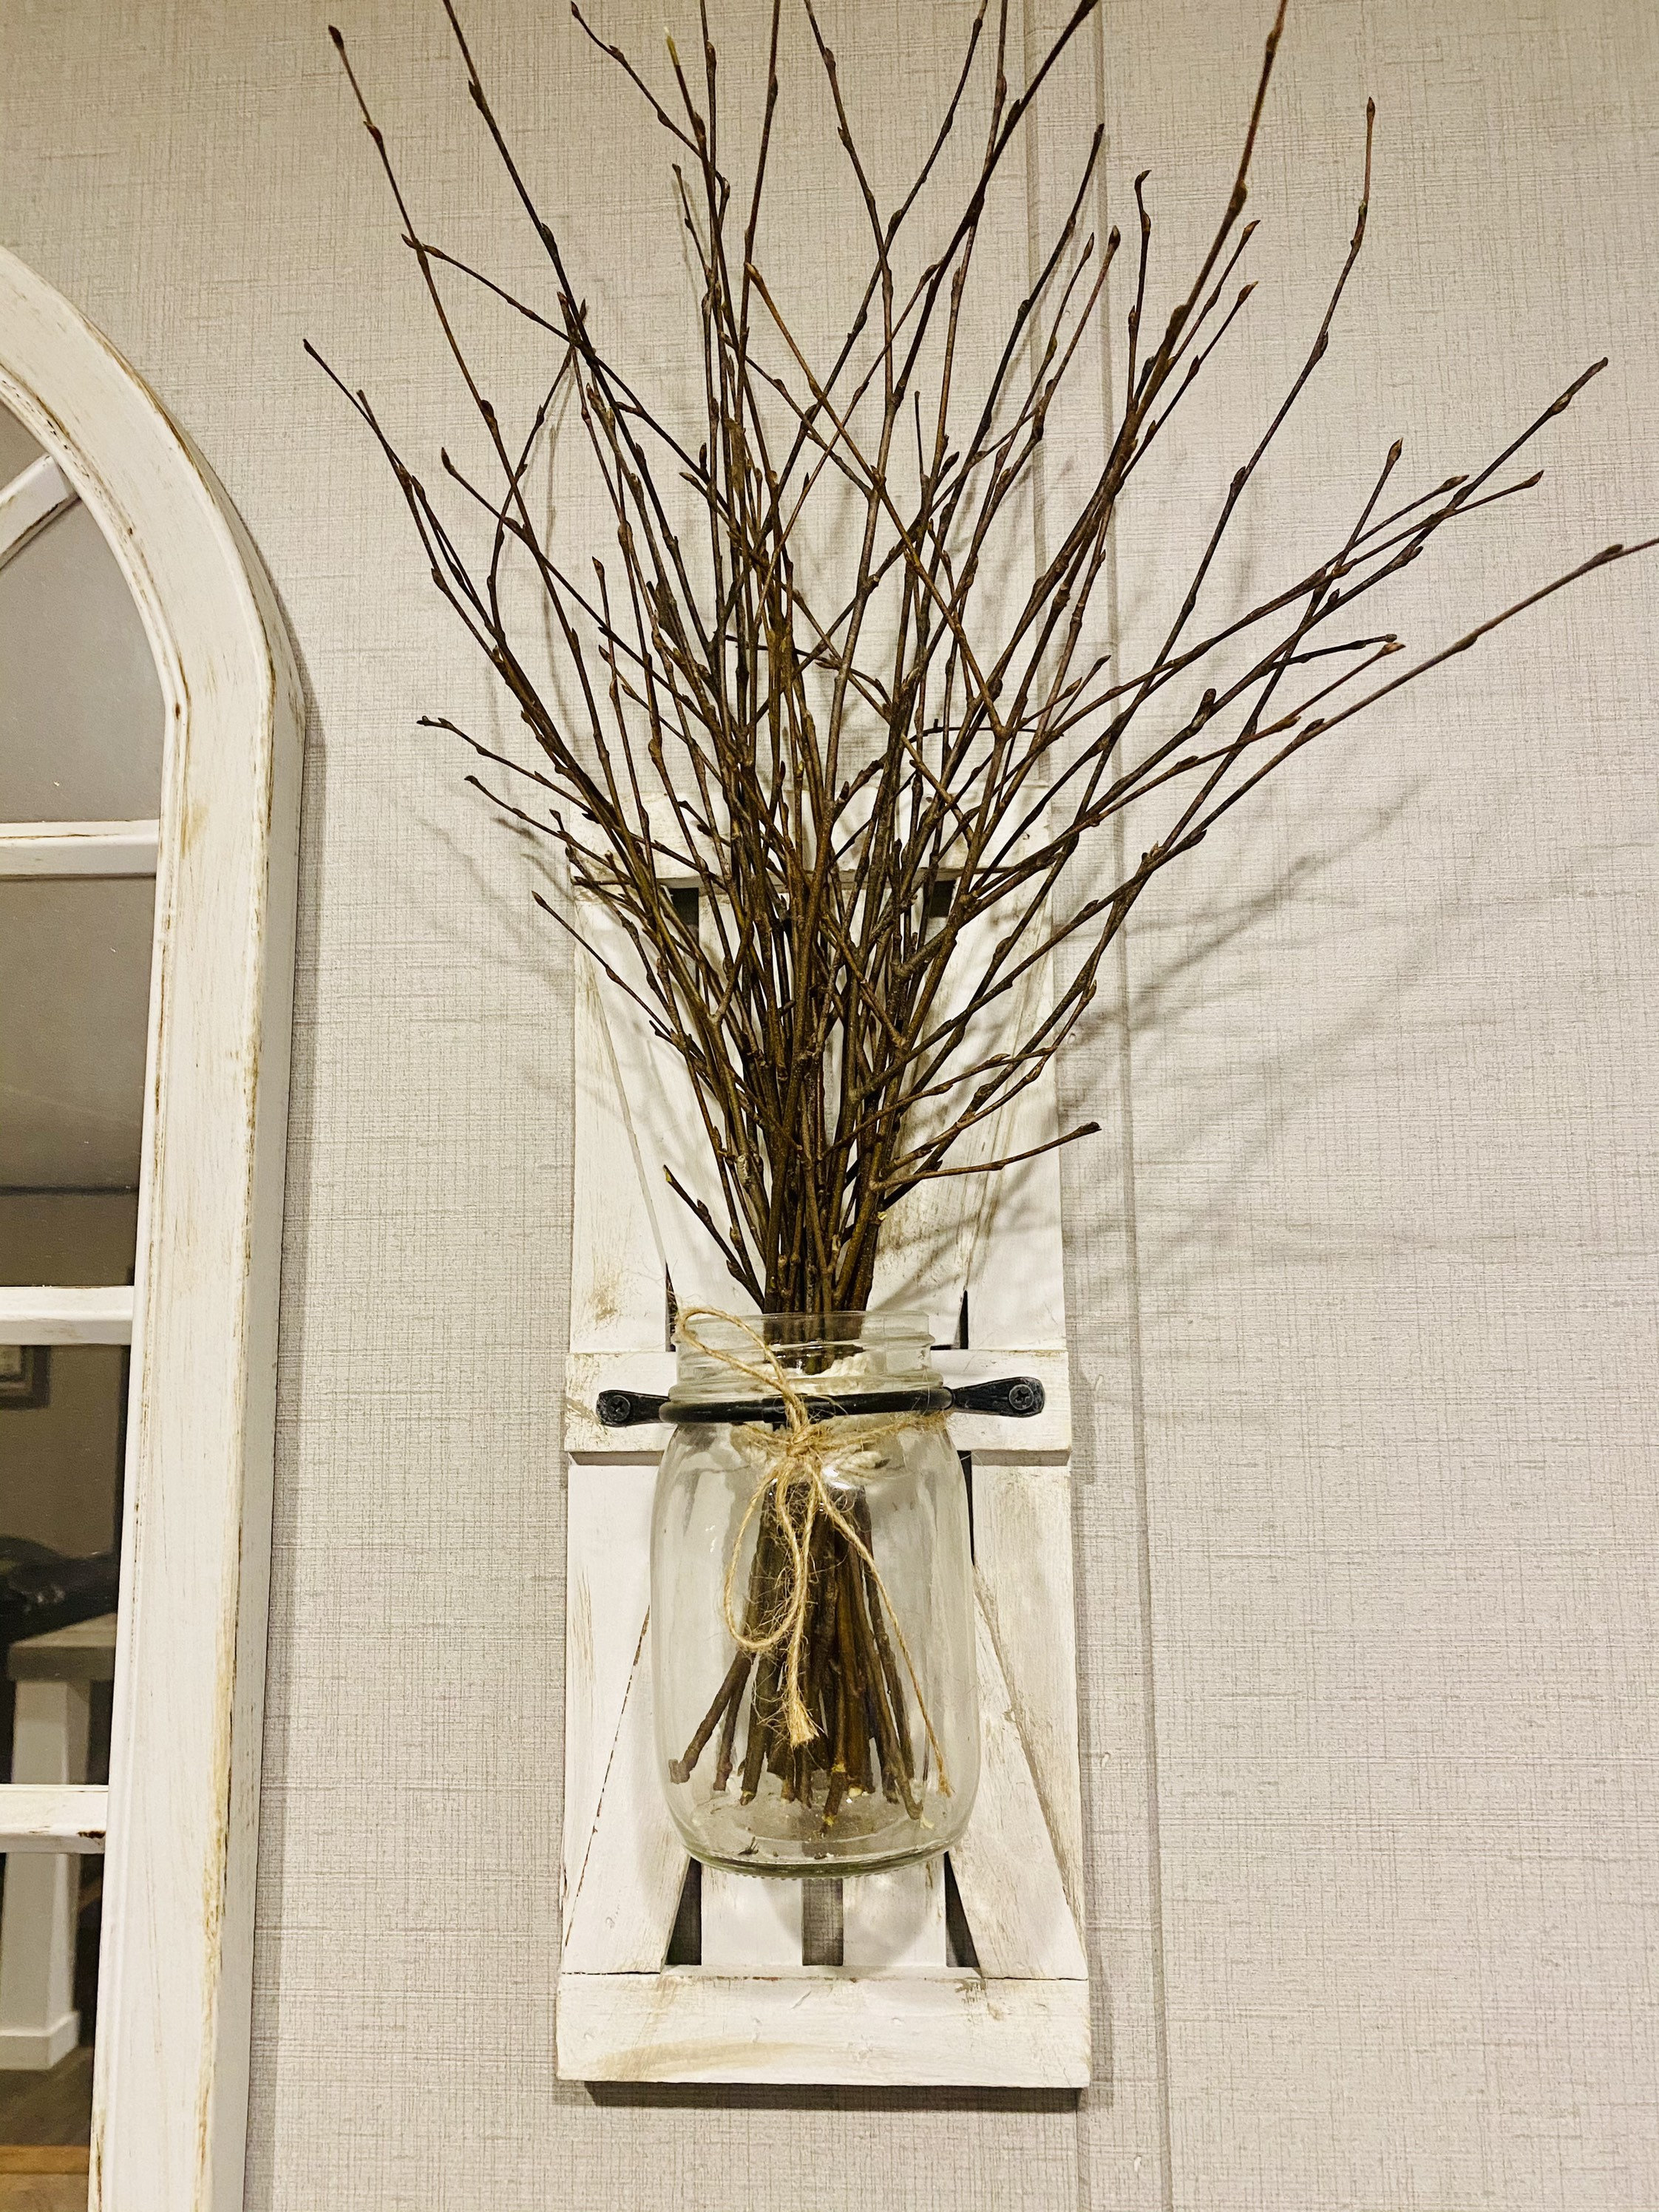 50 Pcs Birch Branches for Vases, Decoration for Sale. Natural Birch Twigs for Centerpieces. Floral Stick.